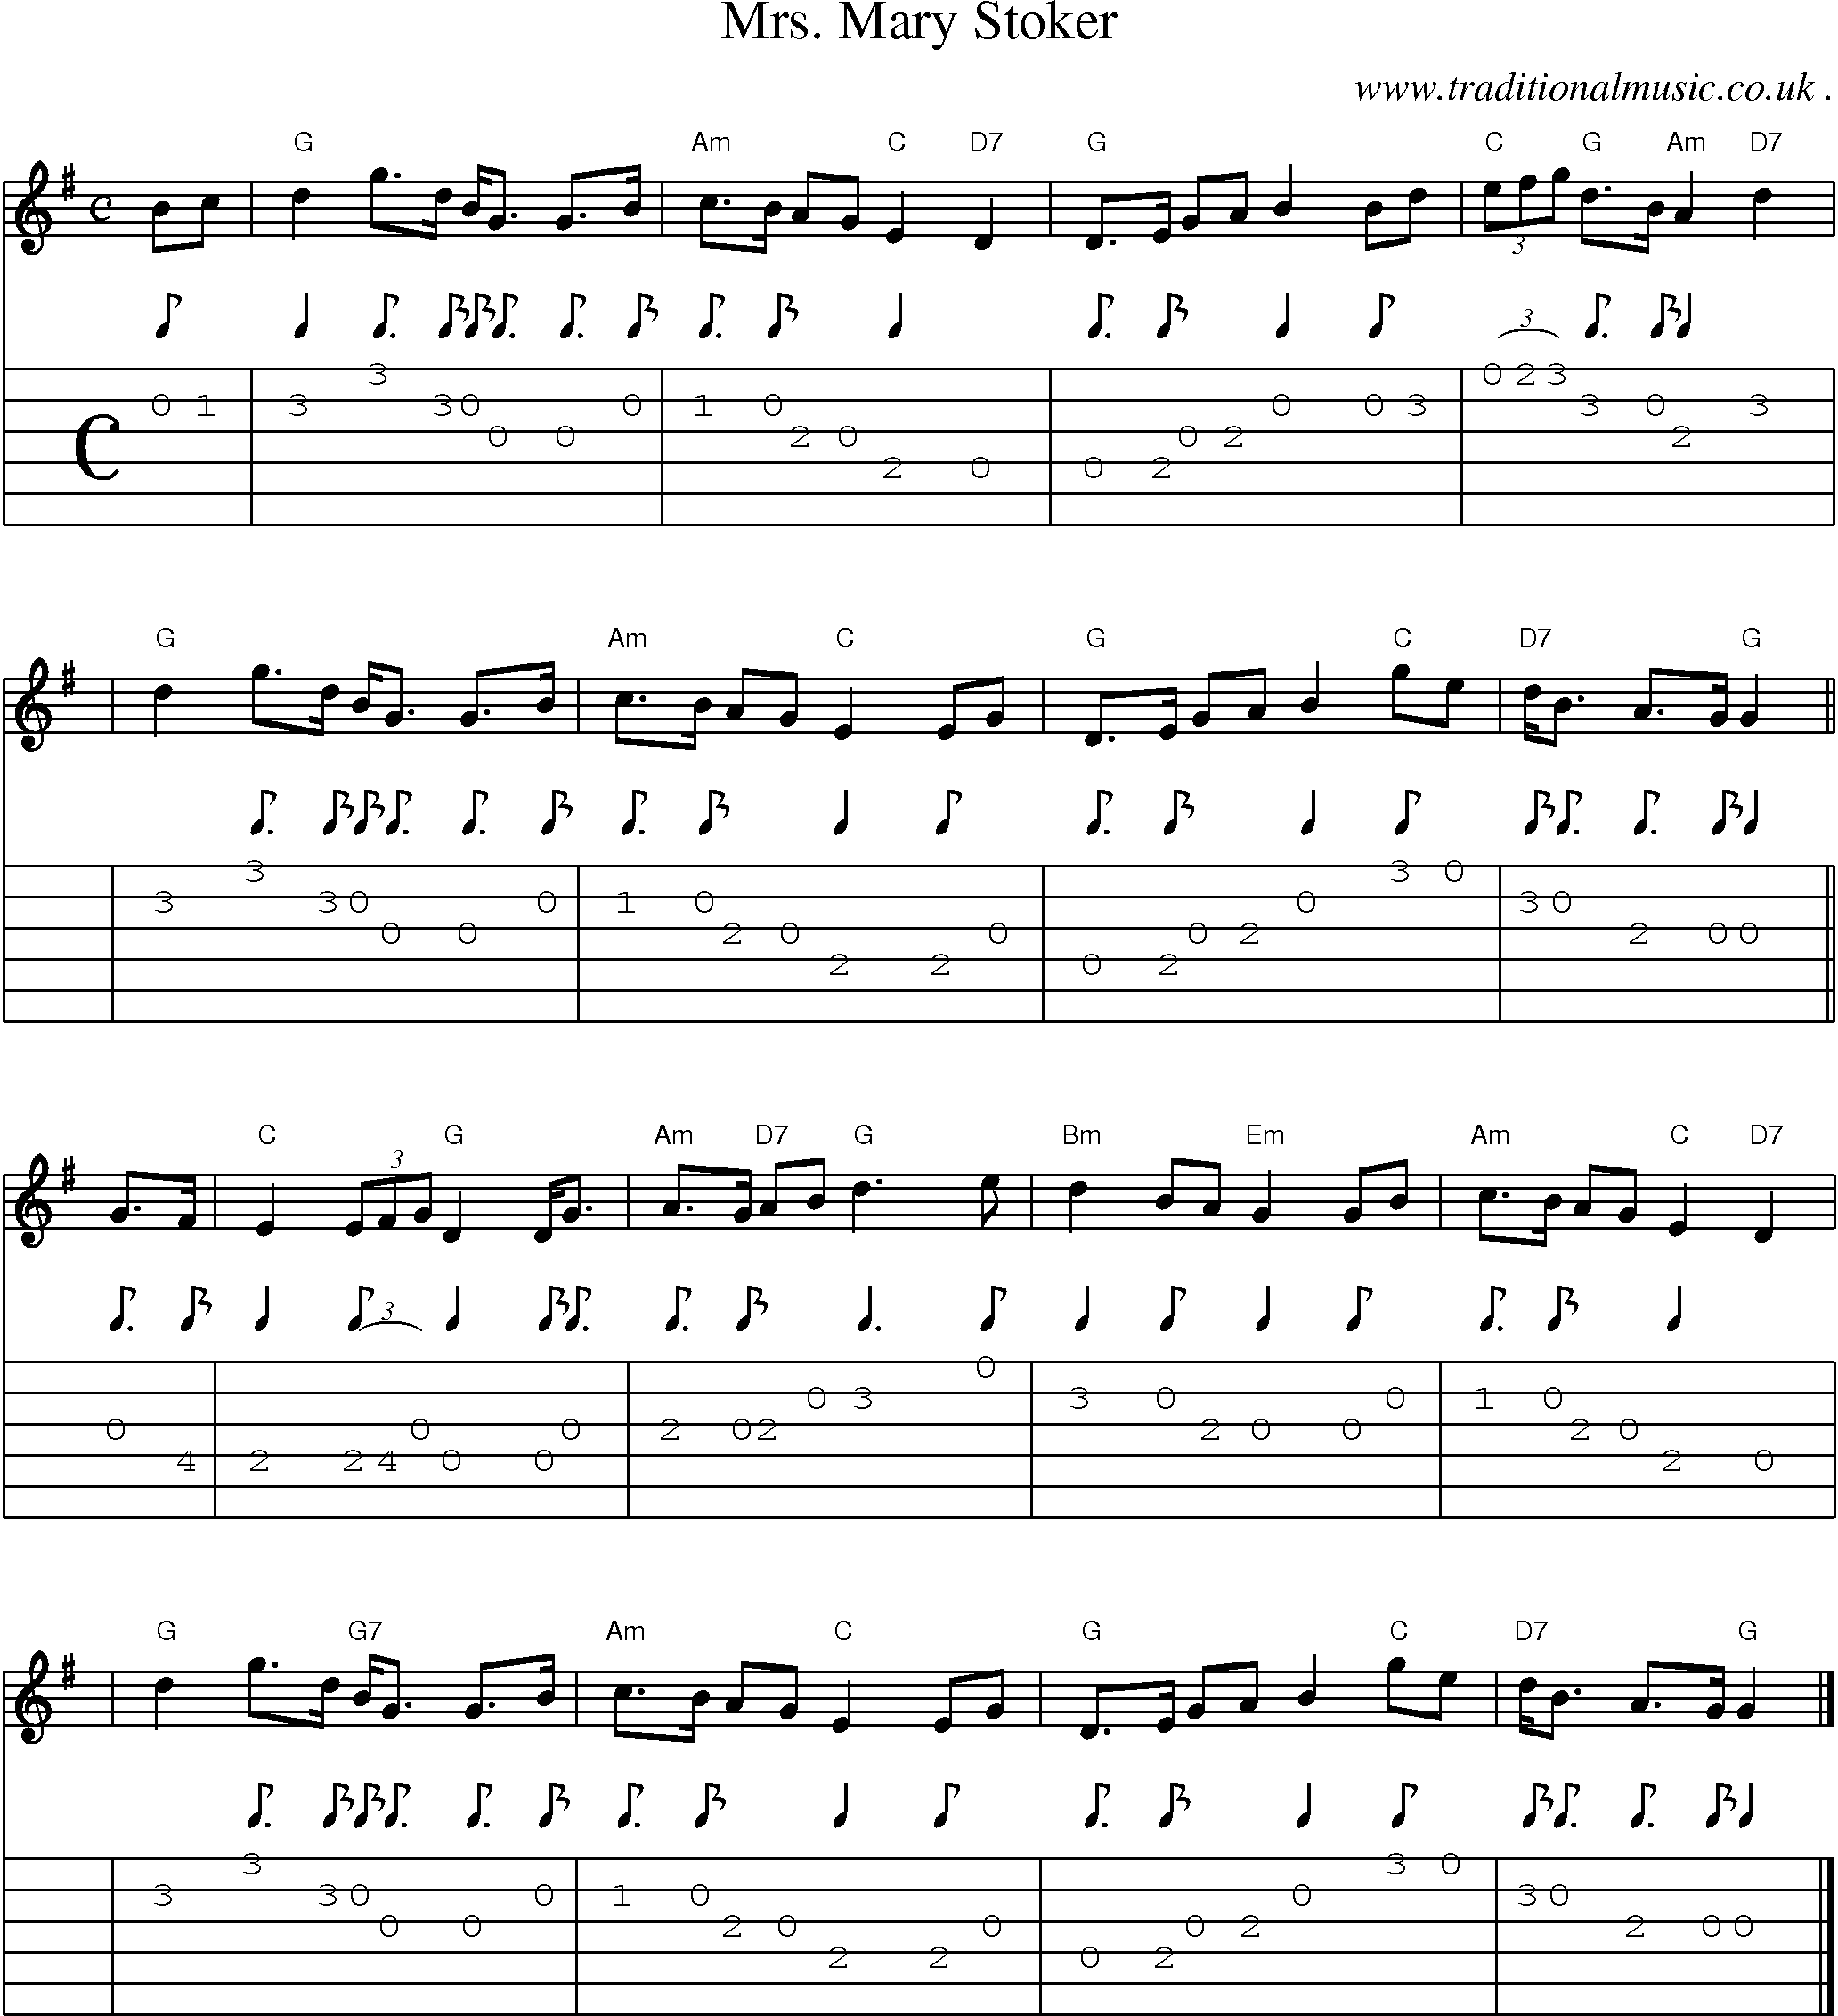 Sheet-music  score, Chords and Guitar Tabs for Mrs Mary Stoker